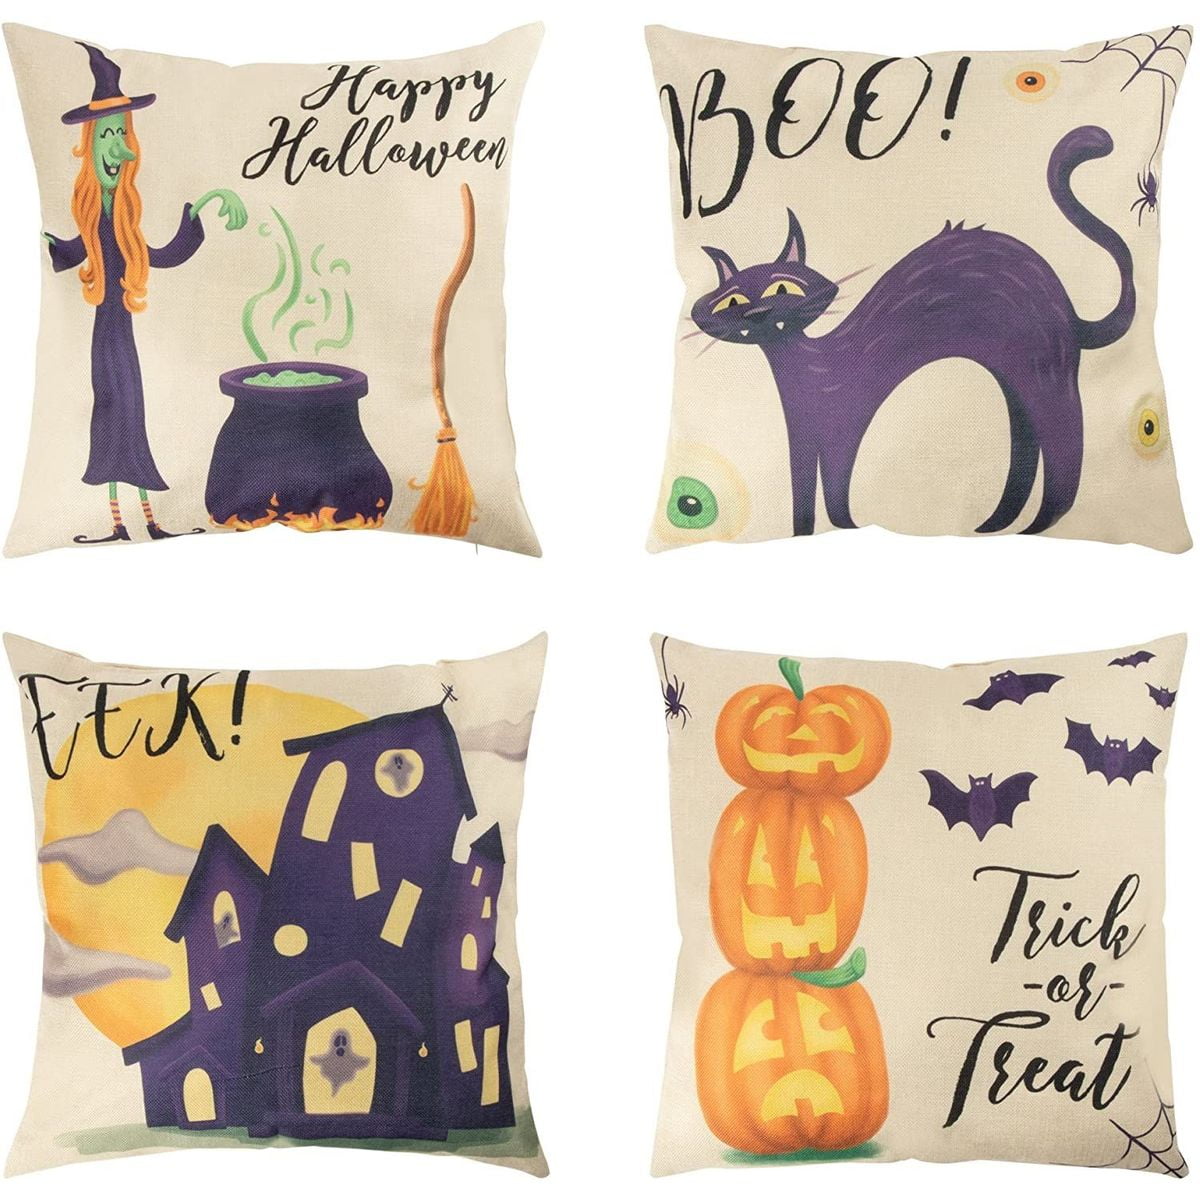 Pillow Covers 18x18 Inch Cushion Cover Pillow Cover Halloween Set Of 4 